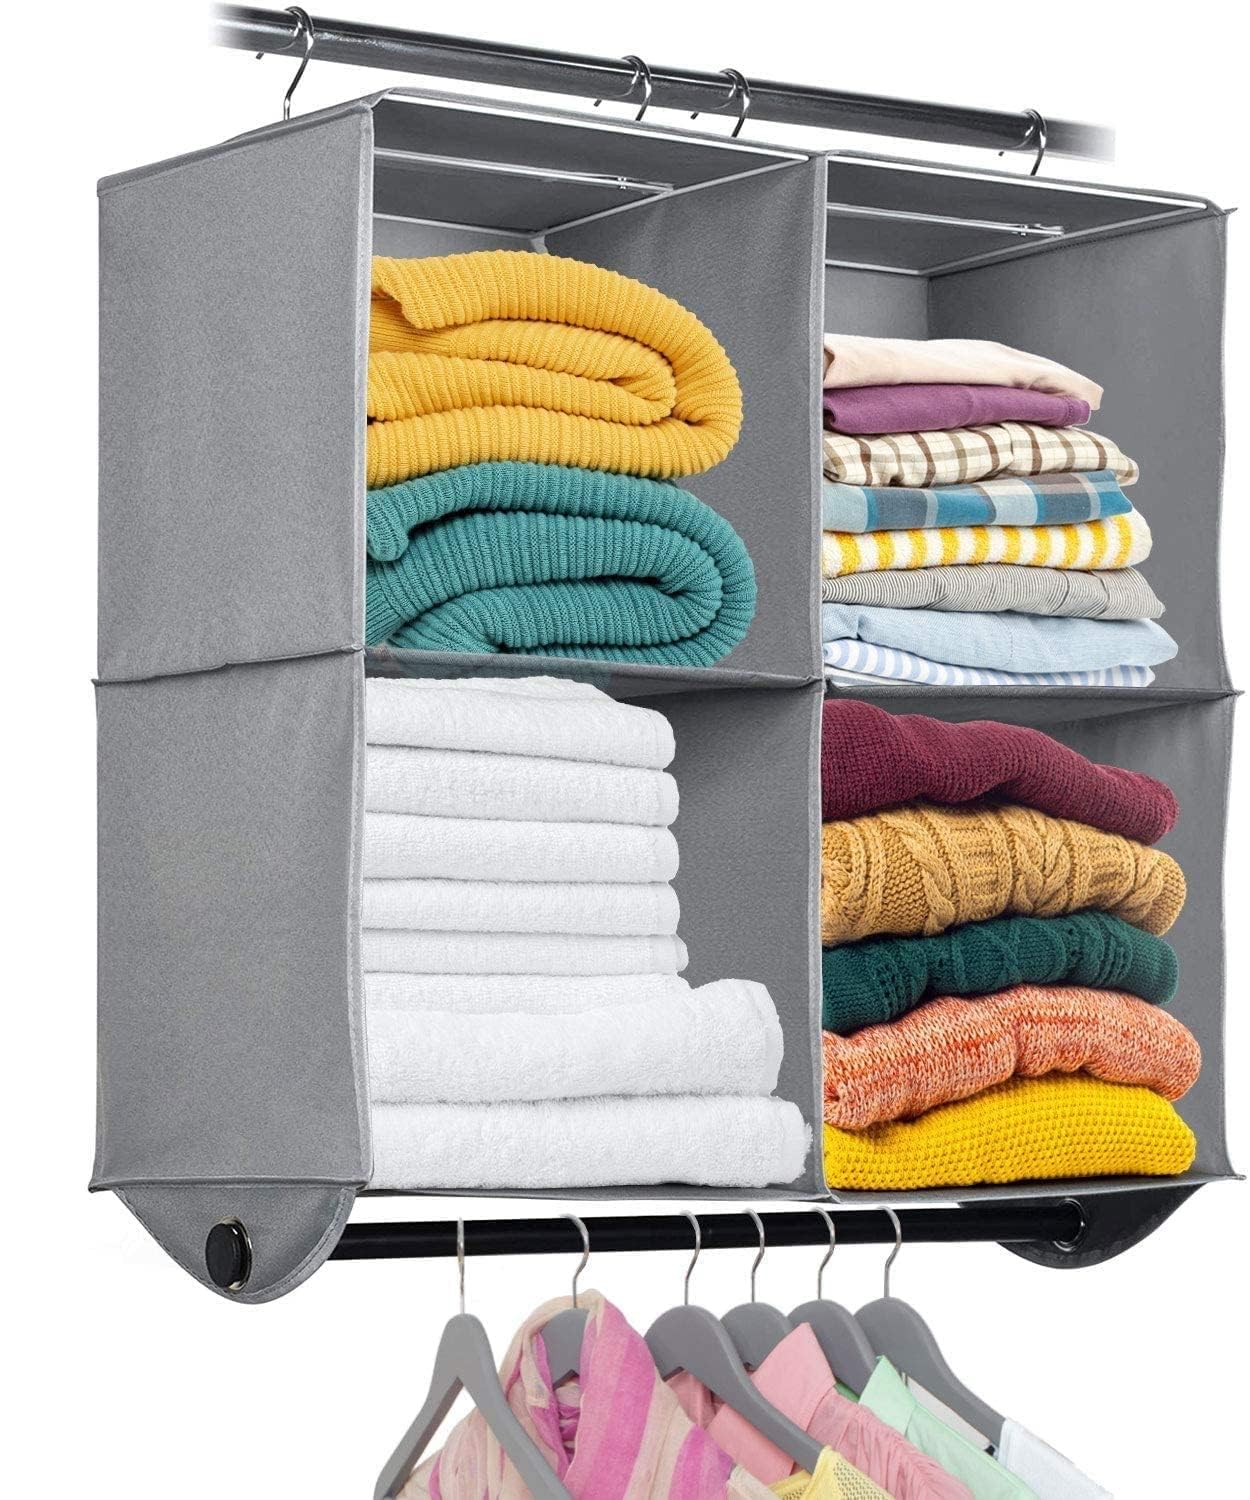 Hanging Closet Organizers with 4 Shelves - Closet Storage and RV Closet Organizer - Grey with Black Metal Rod - 24� W x 12� D x 29-1/2� H - Perfect for College Dorms  - Very Good